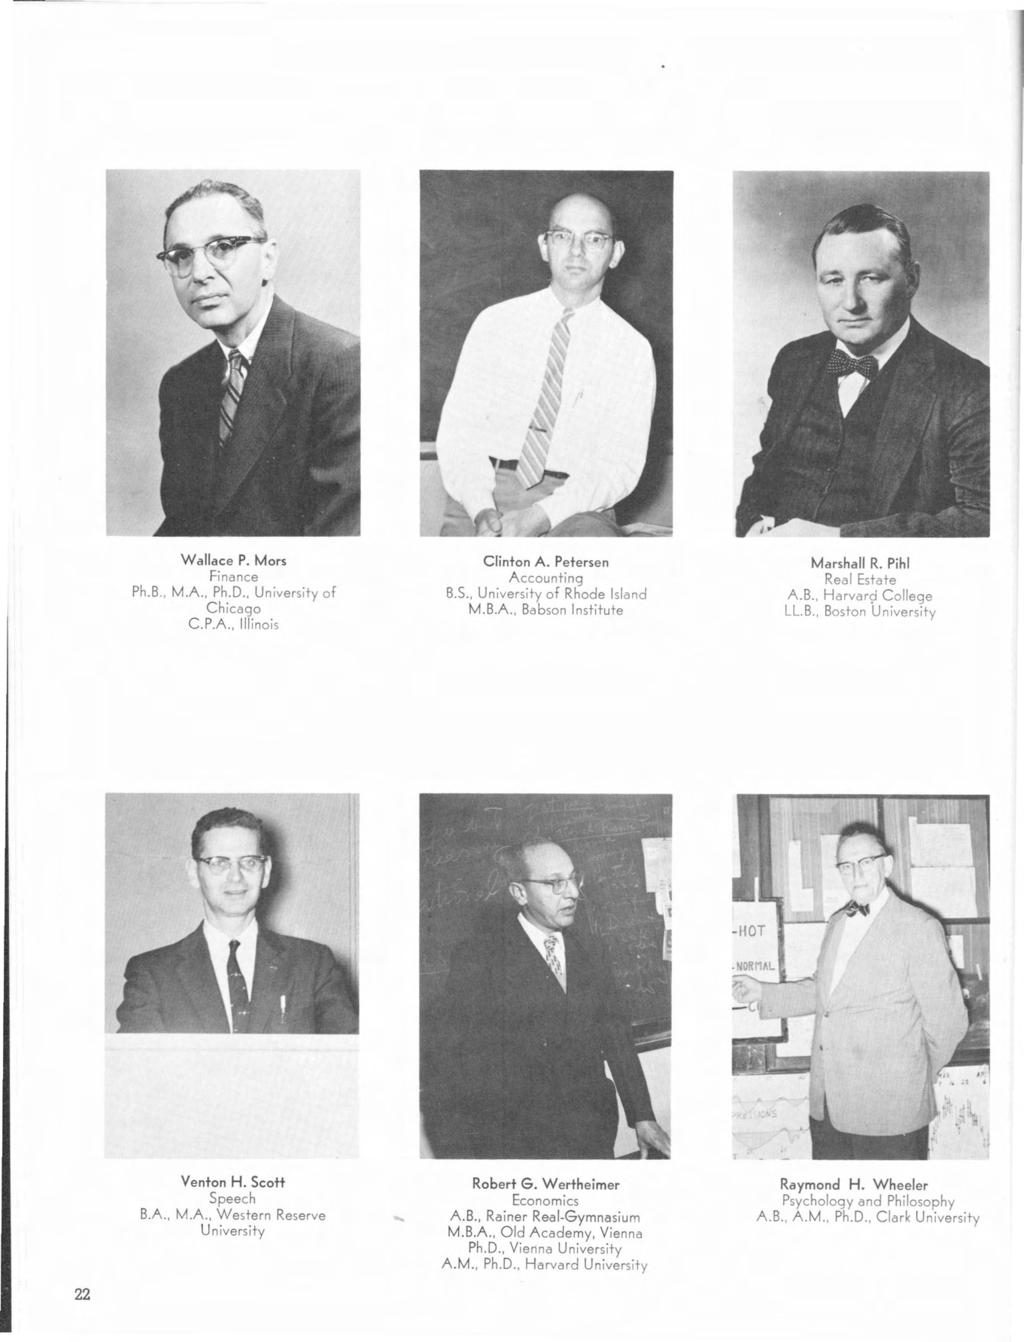 Wallace P. Mors Finance Ph.B., M.A, Ph.D., University of Chicago c.p.a., Illinois Clinton A. Petersen Accounting B.S., University of Rhode Island M.B.A, Babson Institute Marshall R.